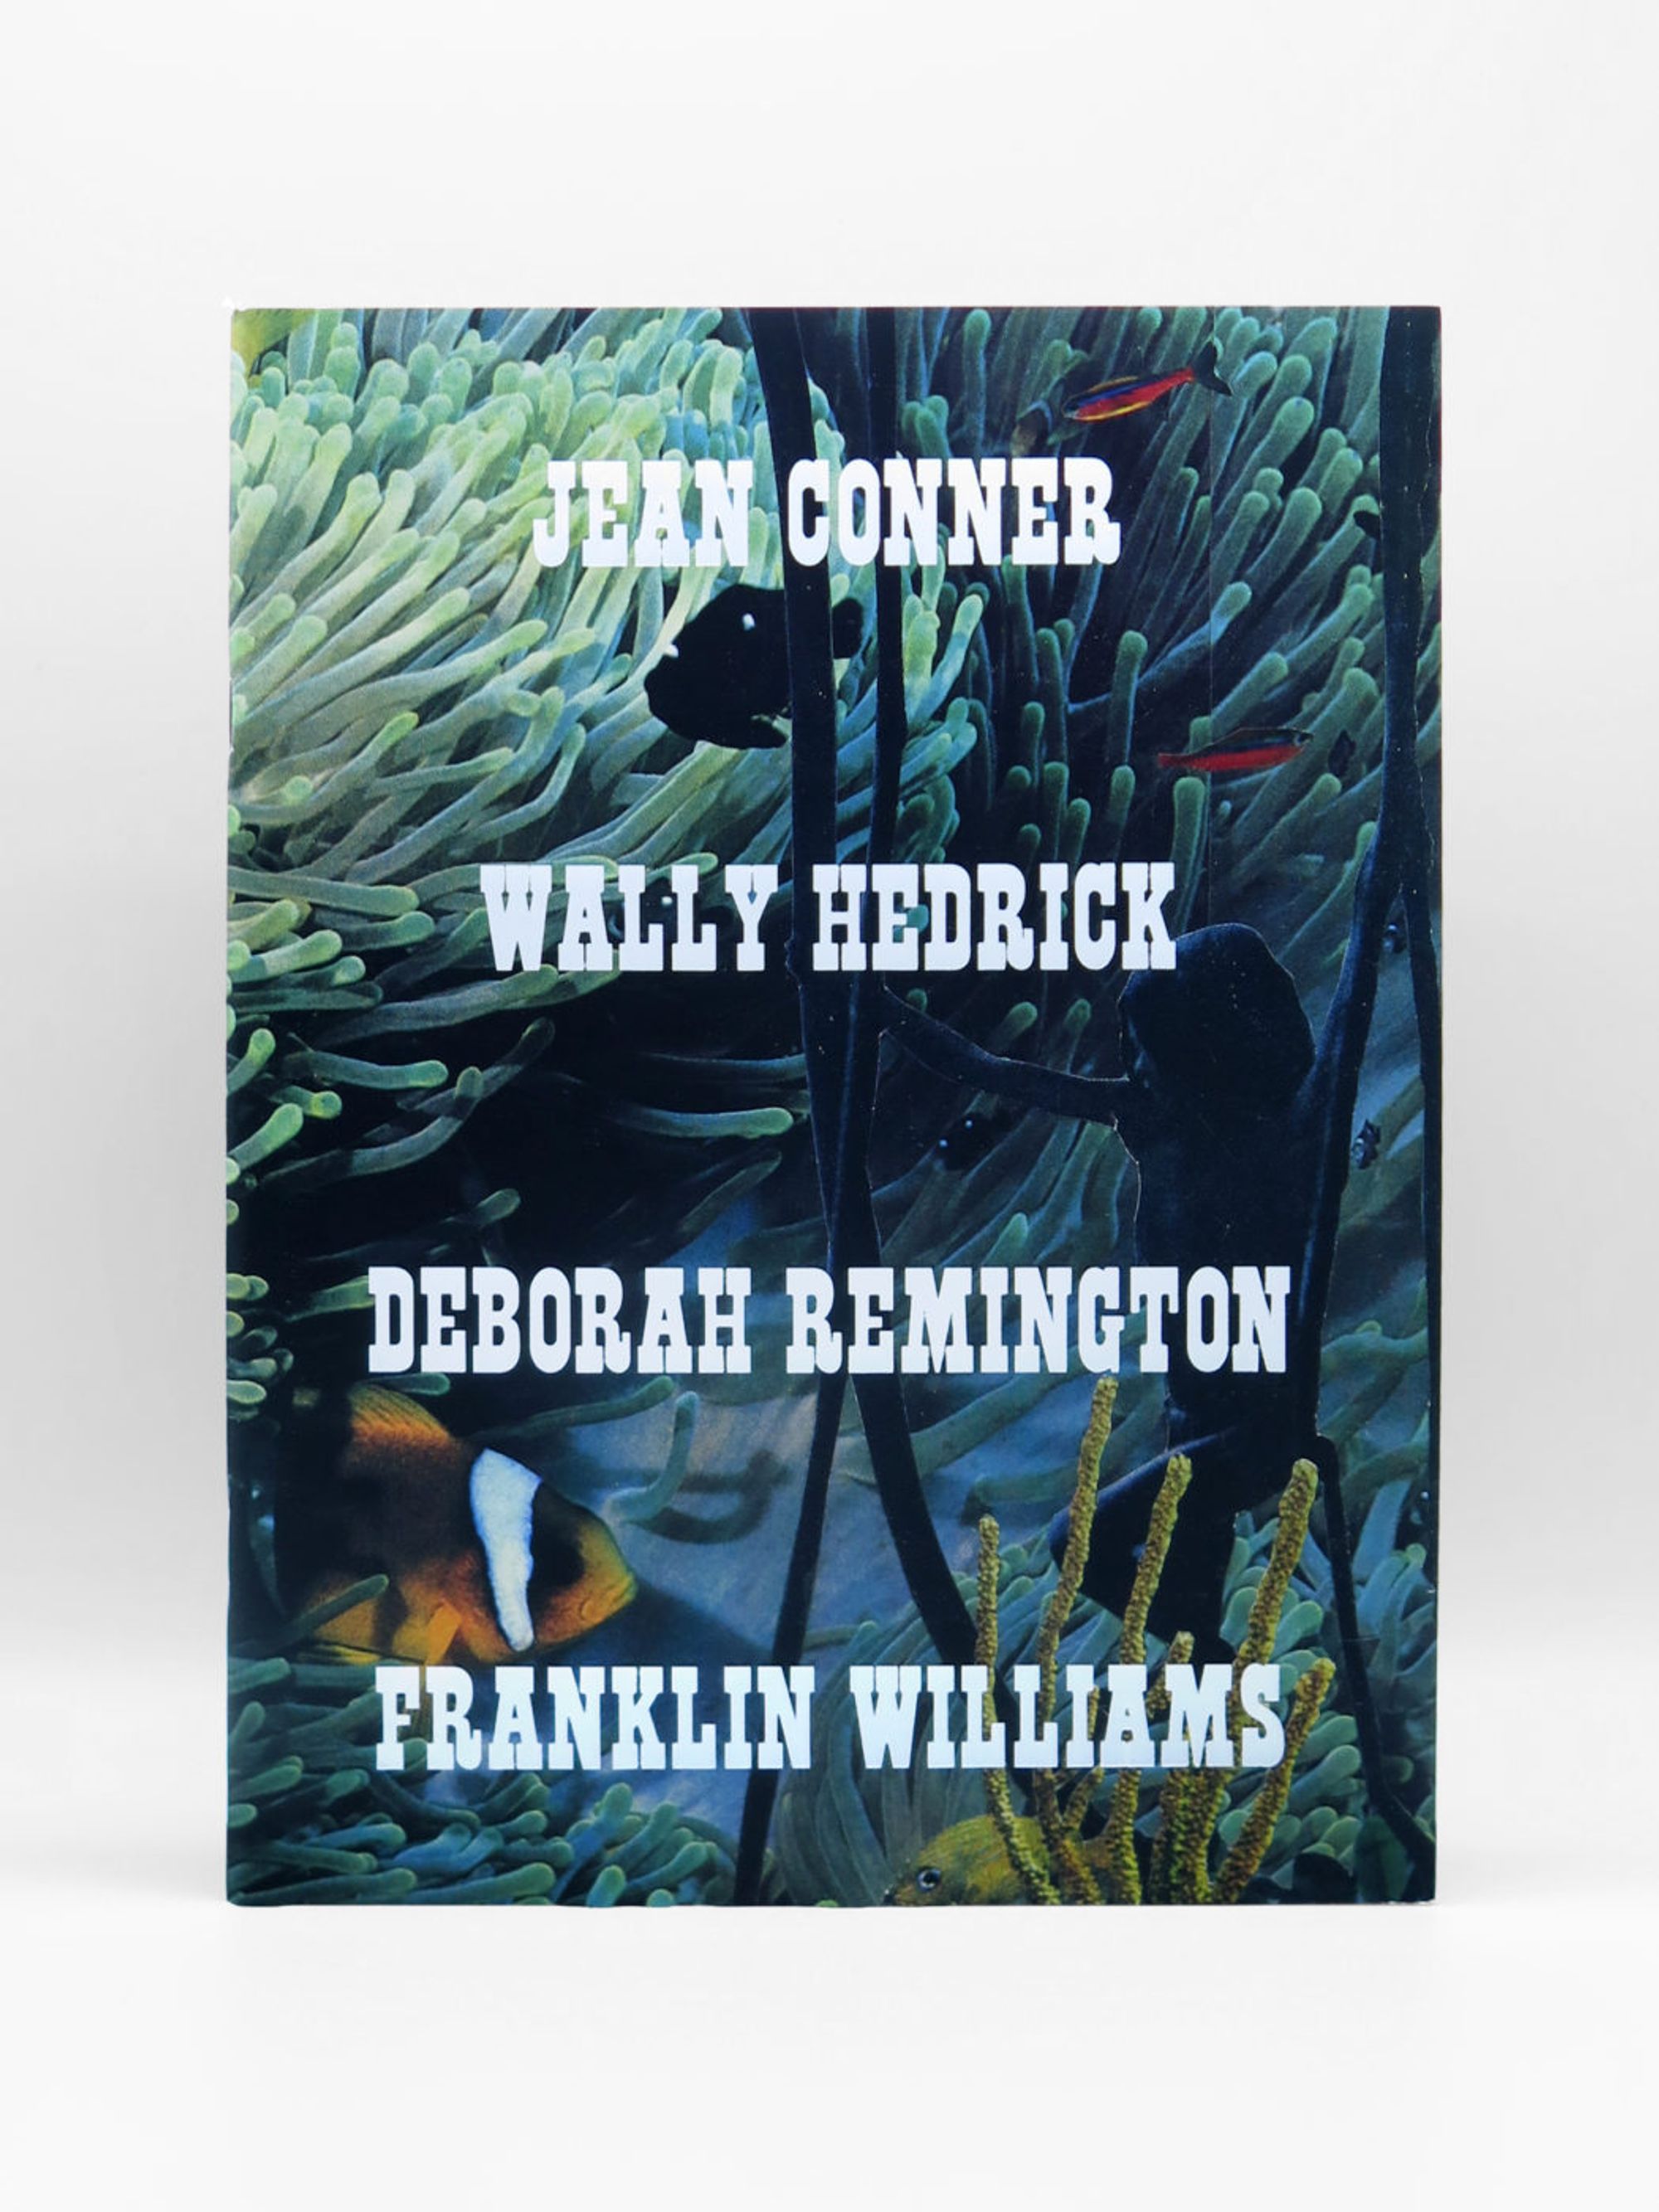 Book cover on plain background with title of Jean Conner, Wally Hedrick, Deborah Remington, Franklin Williams